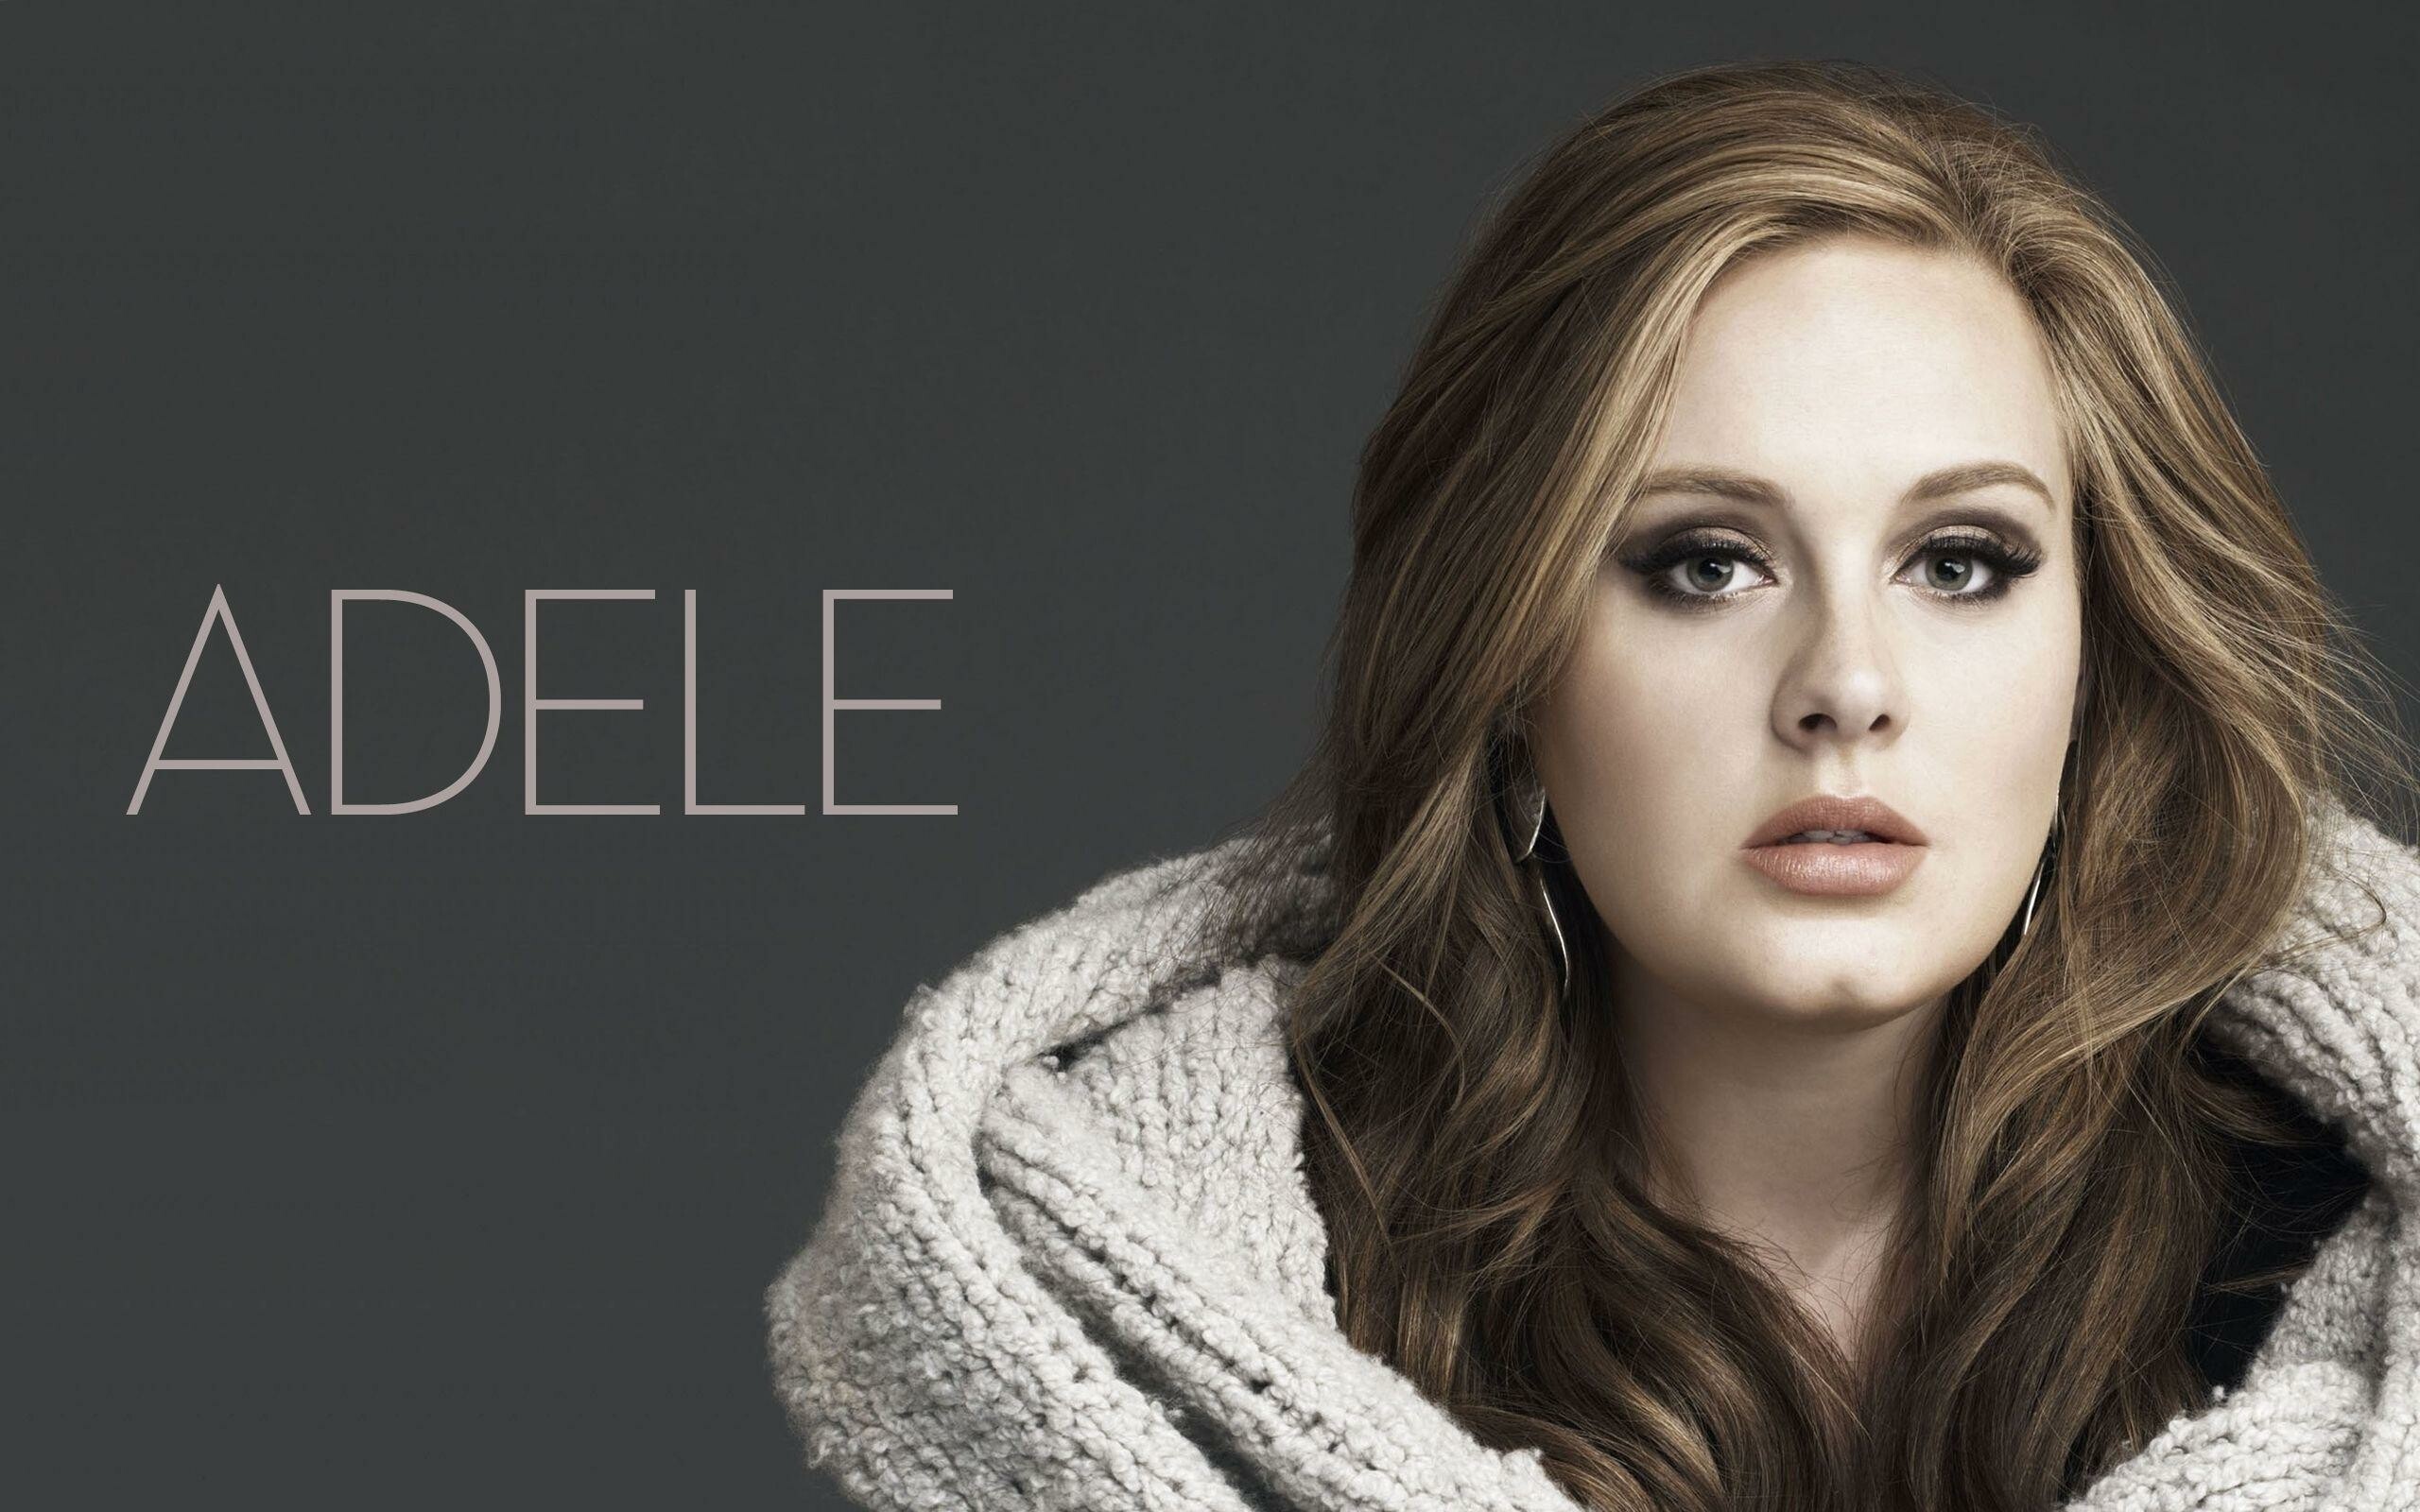 Adele: The lead single, “Hello”, The first song in the US to sell over one million digital copies within a week. 2560x1600 HD Wallpaper.